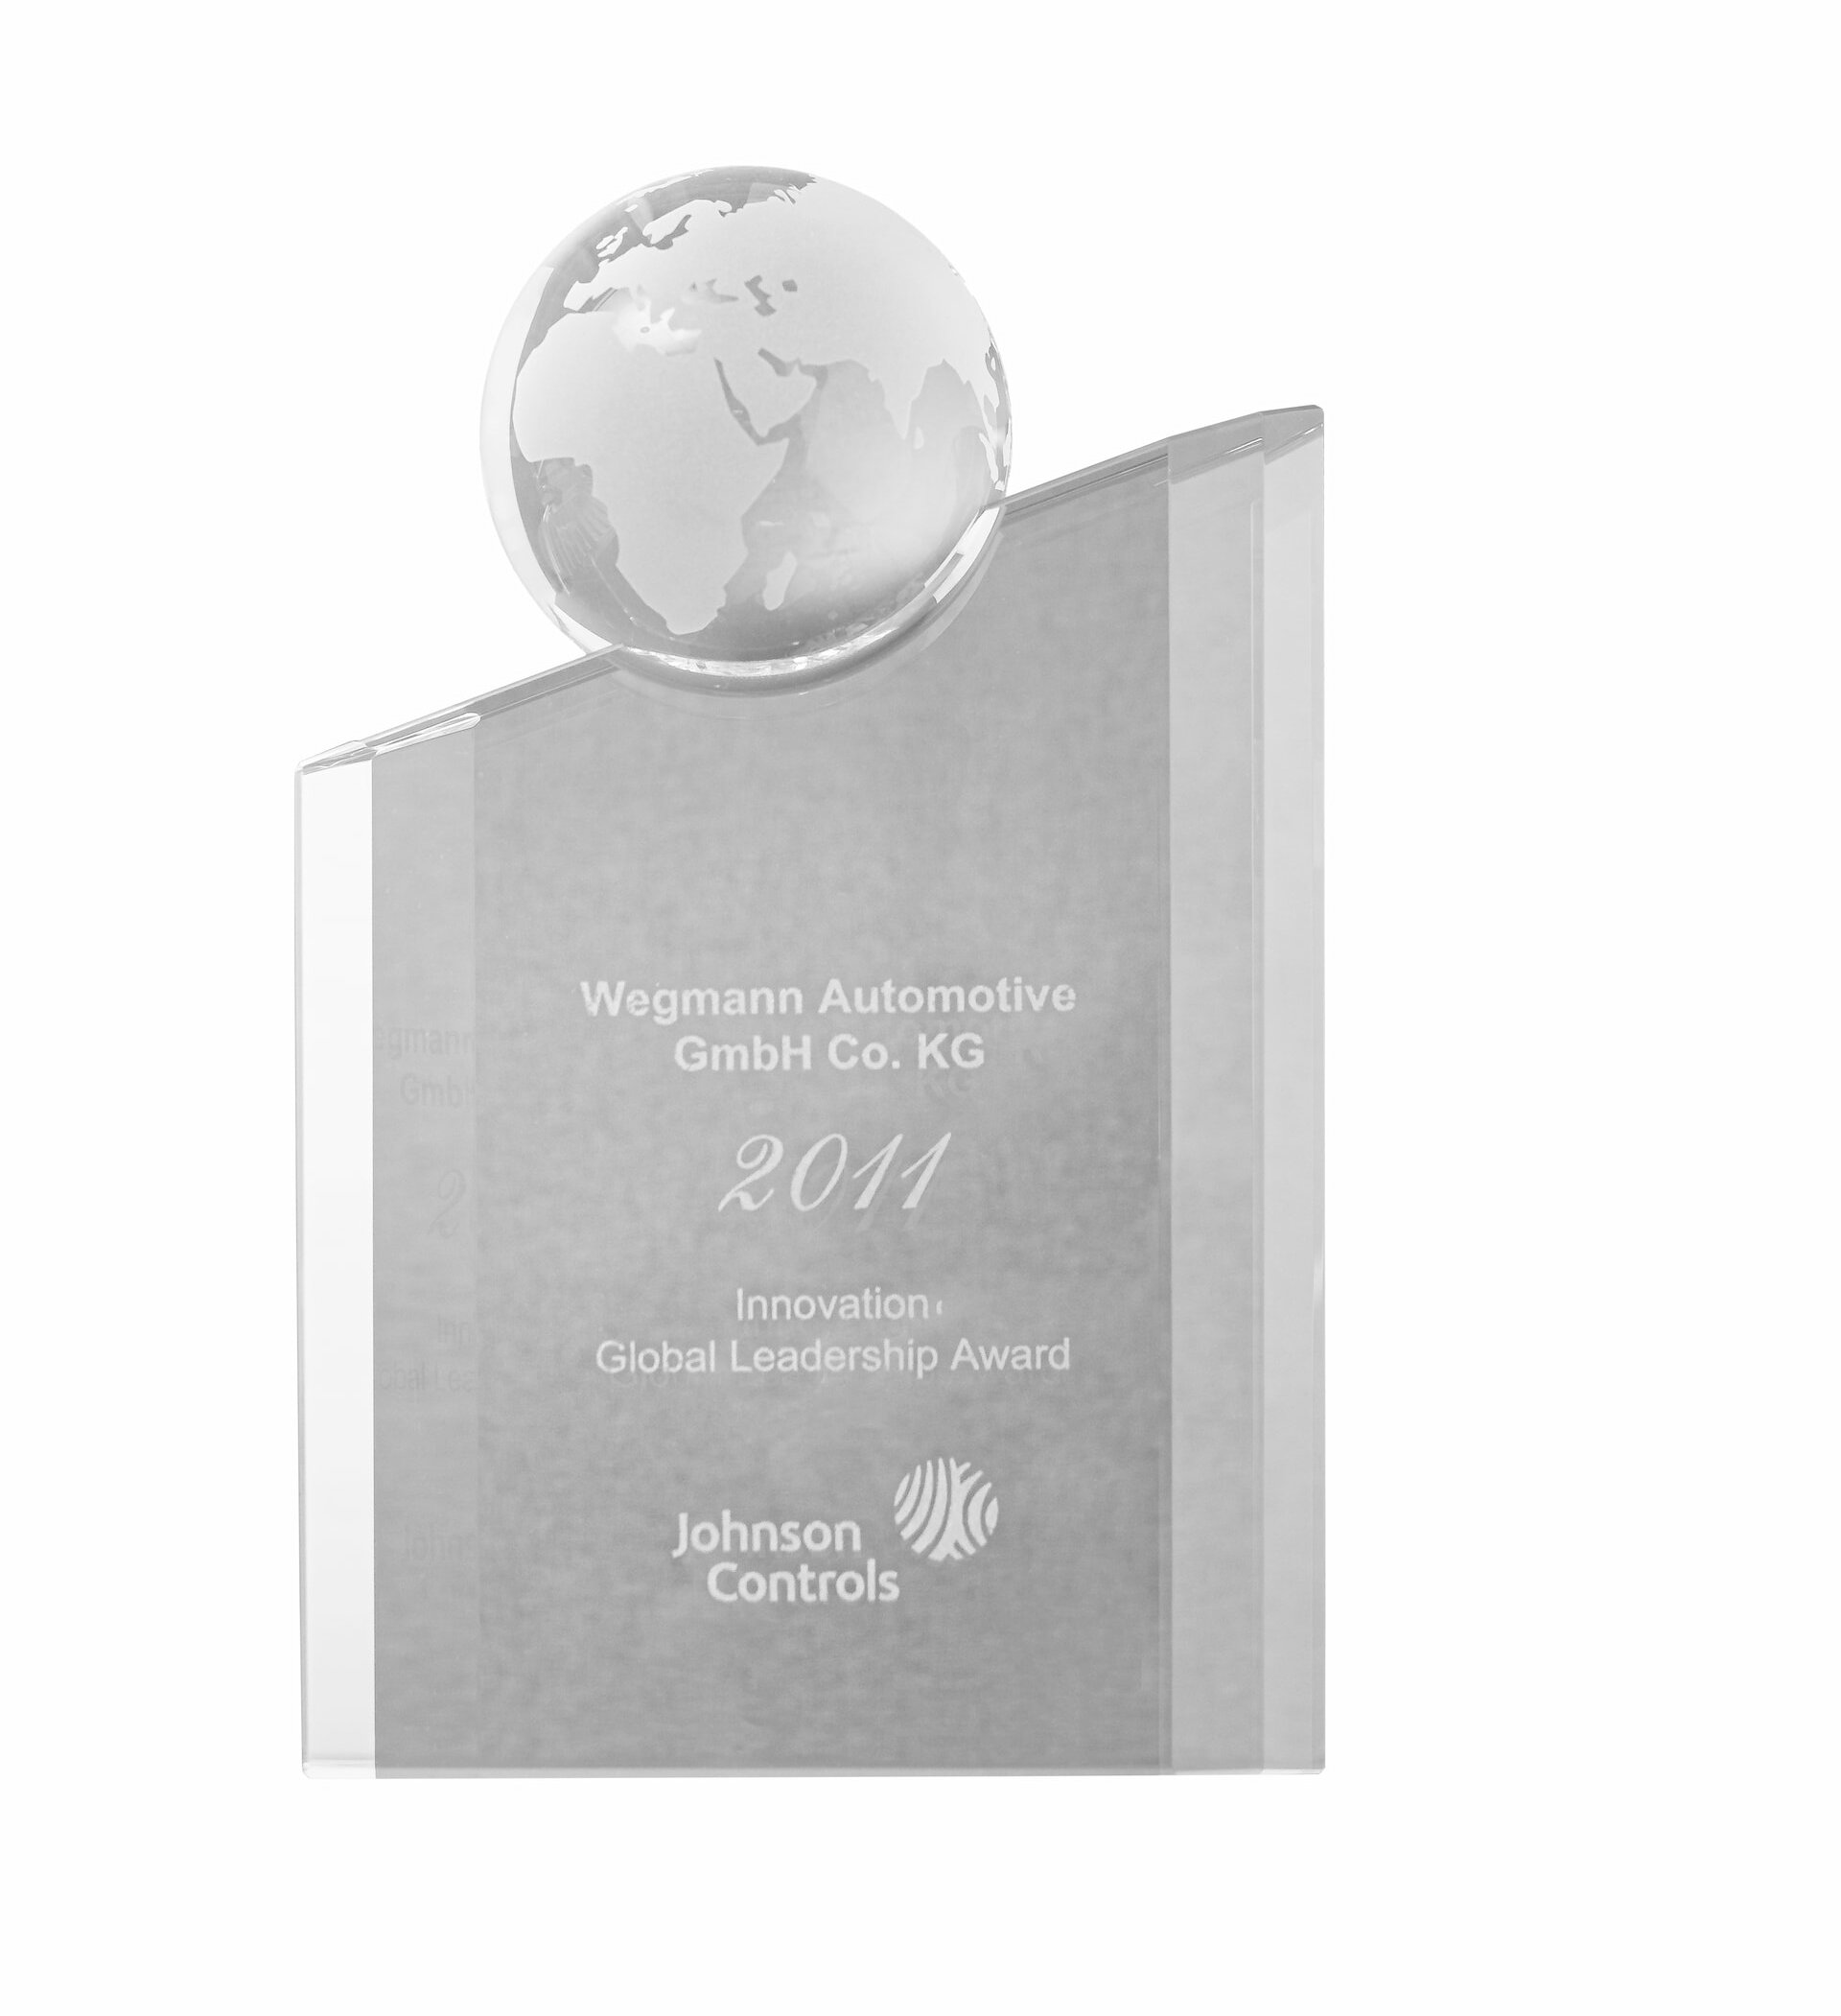 Silver colored award for “Innovation Leadership” from Johnson Controls from 2011